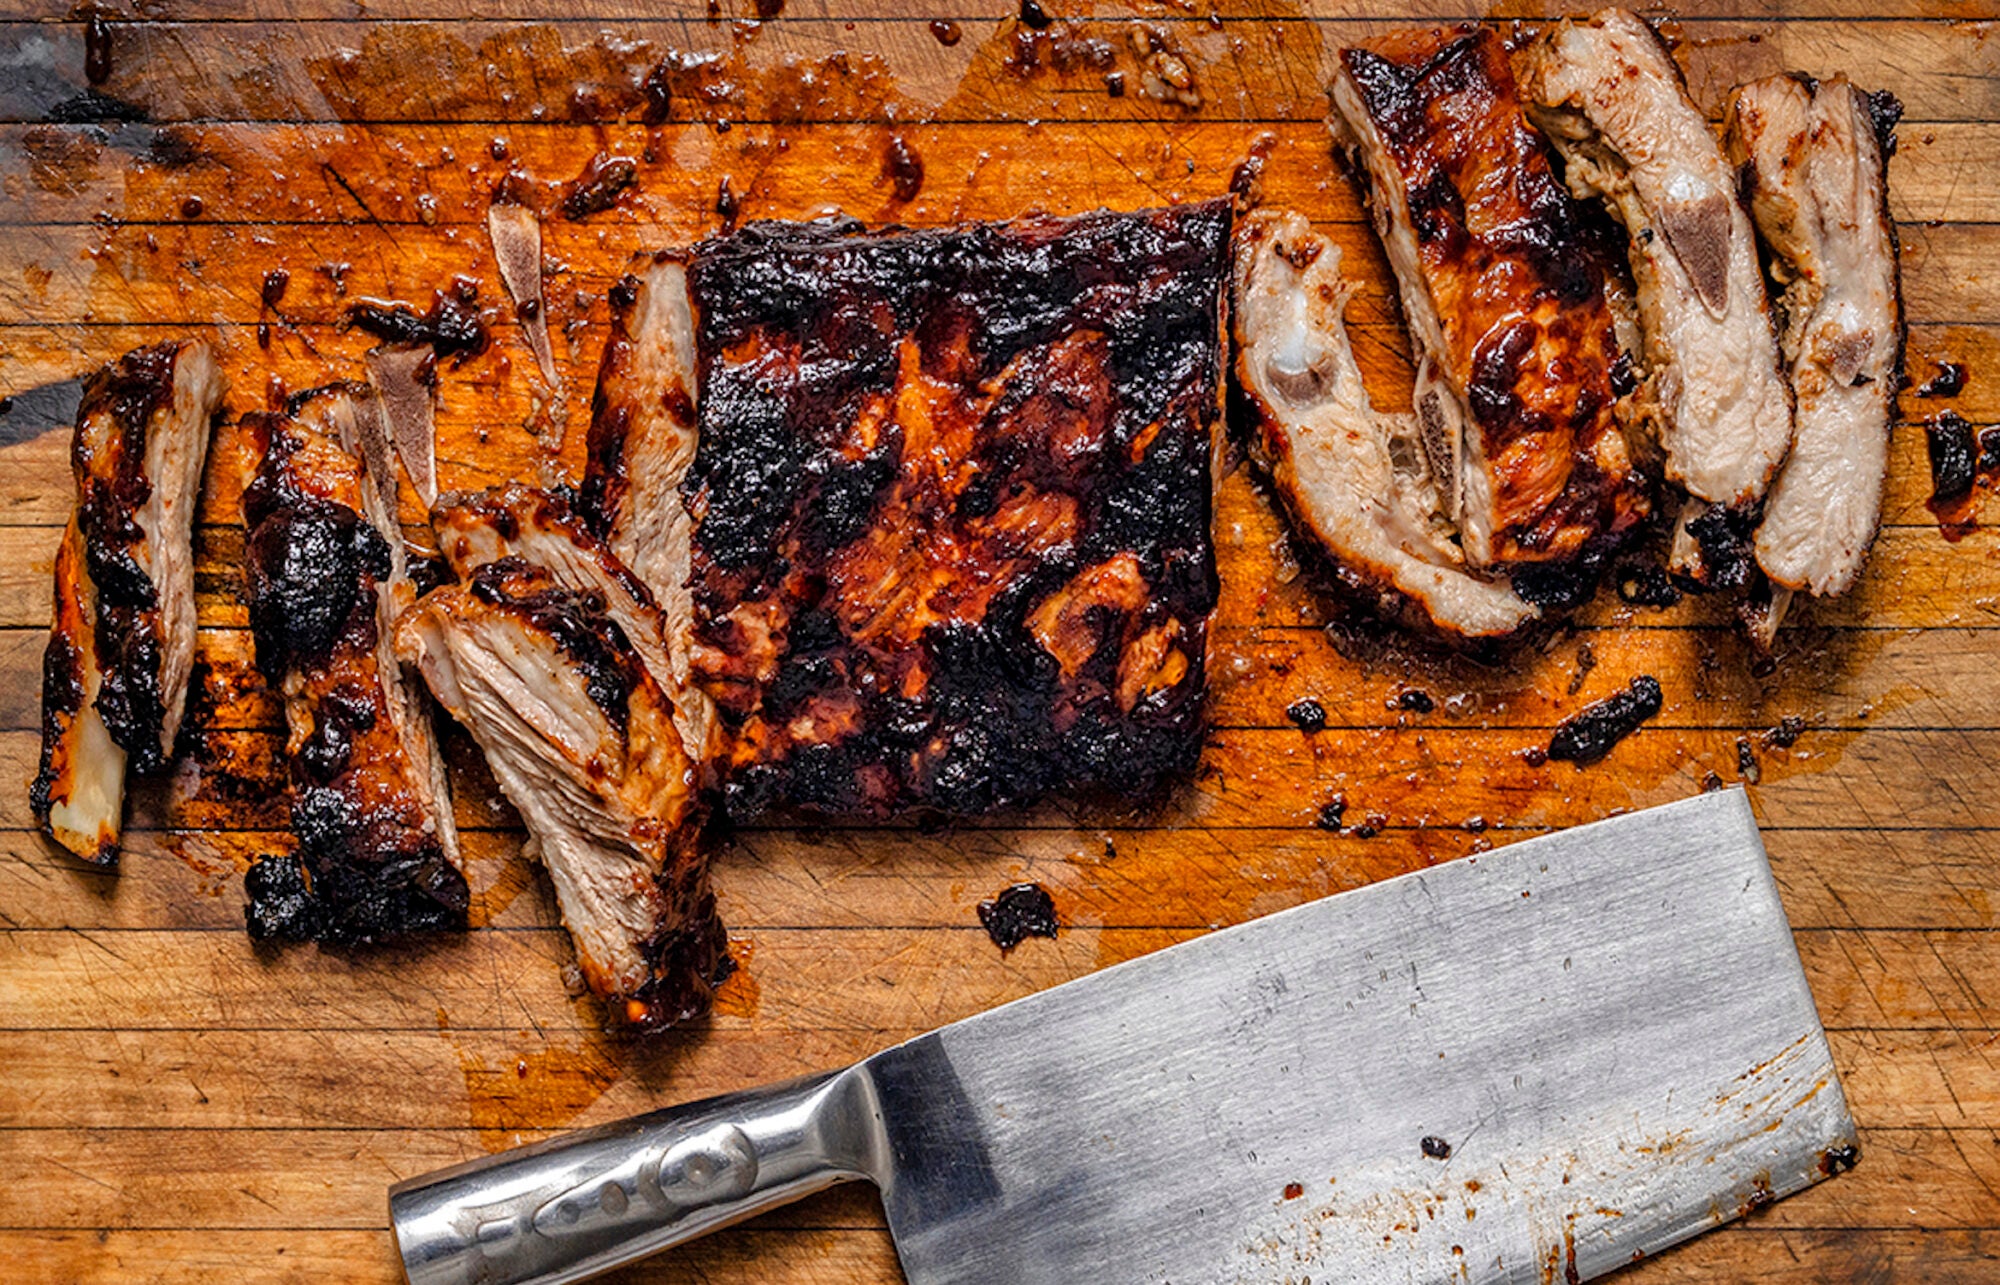 Article-OvenRibs